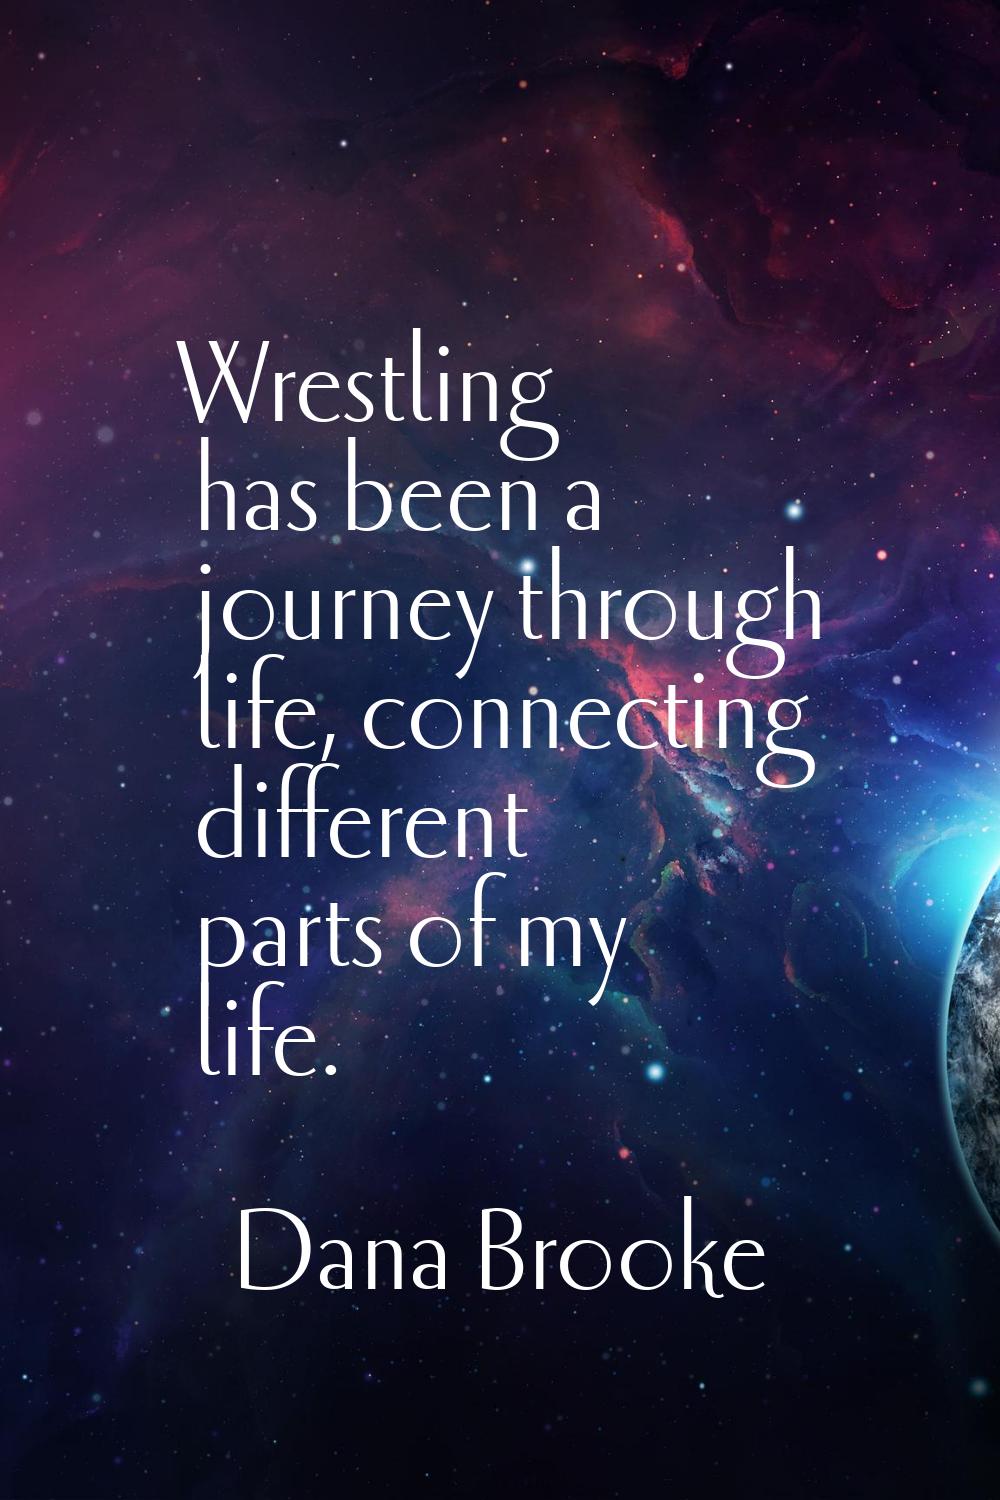 Wrestling has been a journey through life, connecting different parts of my life.